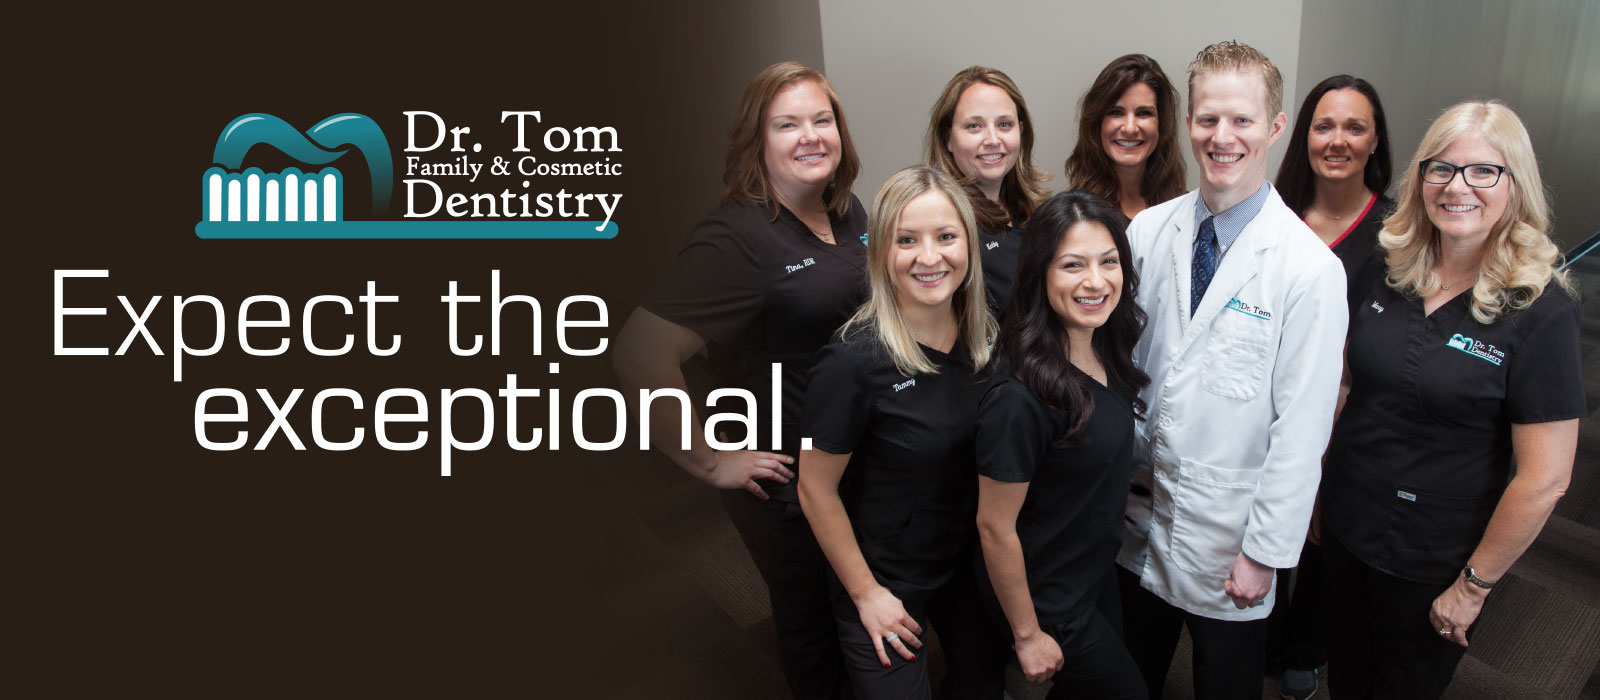 Dr. Tom Family & Cosmetic Dentistry